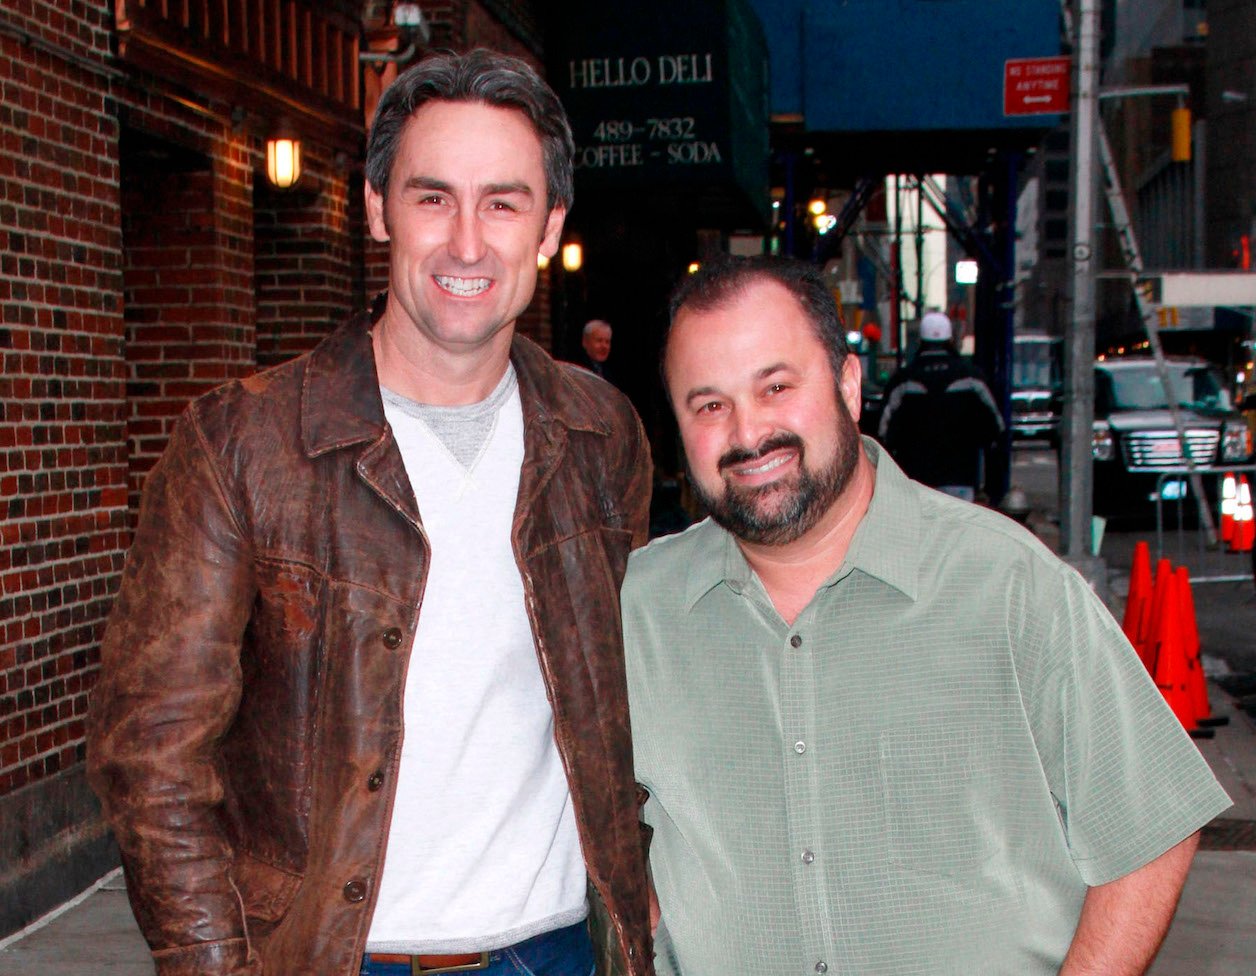 Mike Wolfe and Frank Fritz, the stars of 'American Pickers,' standing next to each other and smiling